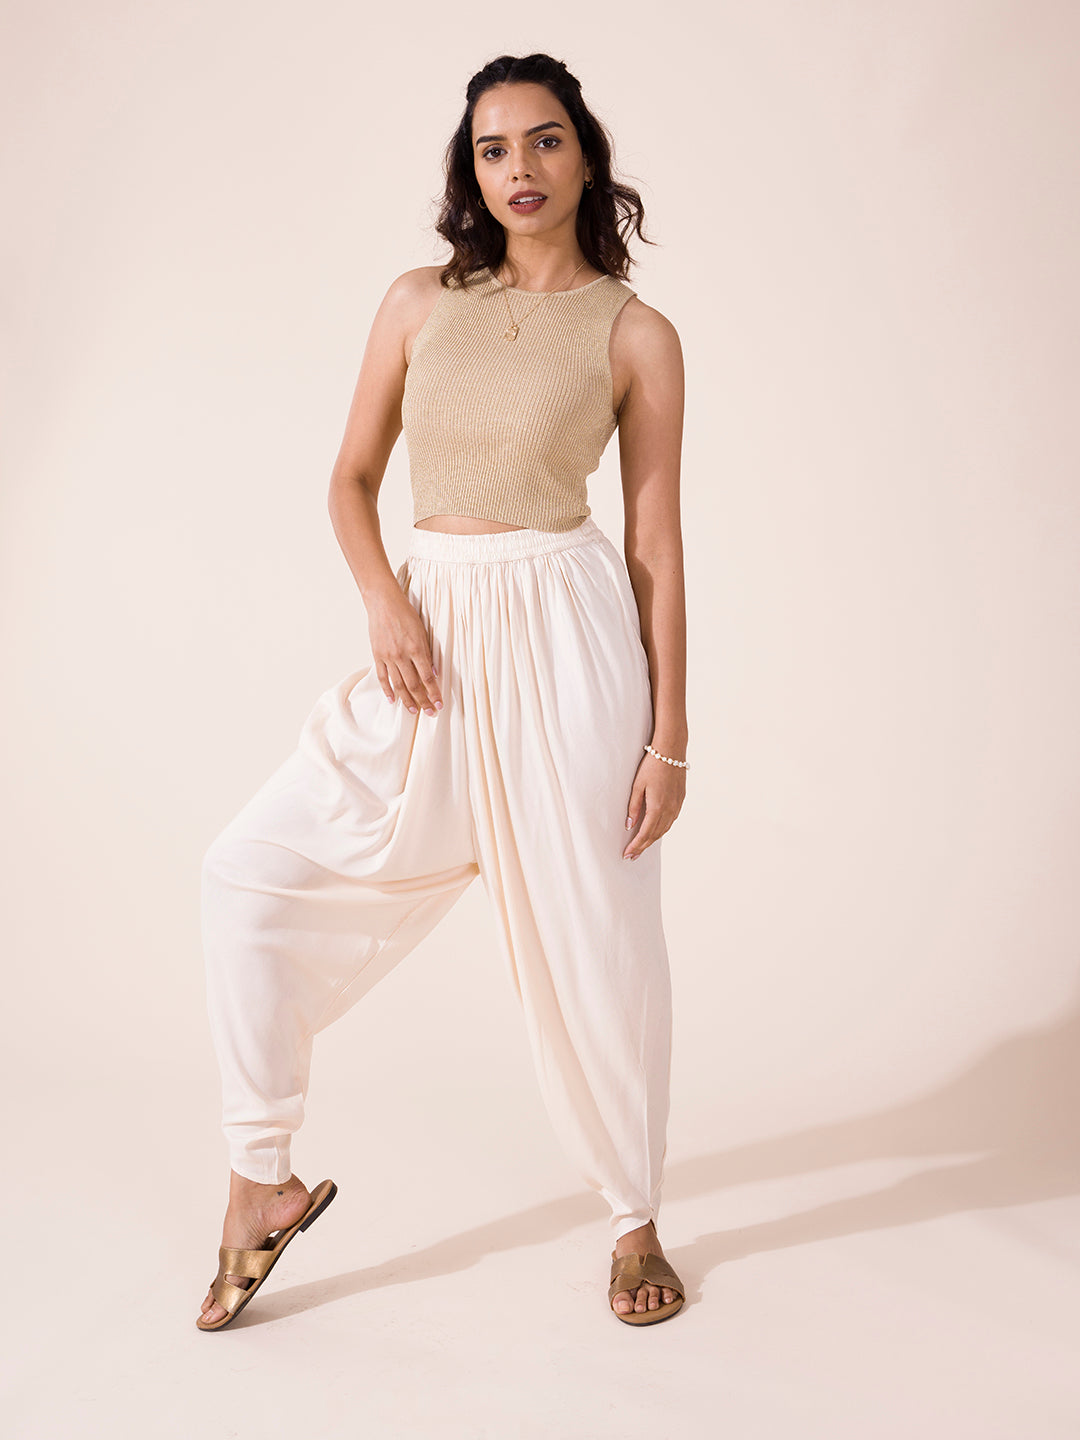 Gear up with your BFFs in our sassiest Harem Dhoti Pants and coolest Kurti  Pants, because who says ethnic can't be eccentric? 👩🏿‍🤝‍👩🏽 Let your  BFFs know they're one-of-a-kind, just like Go